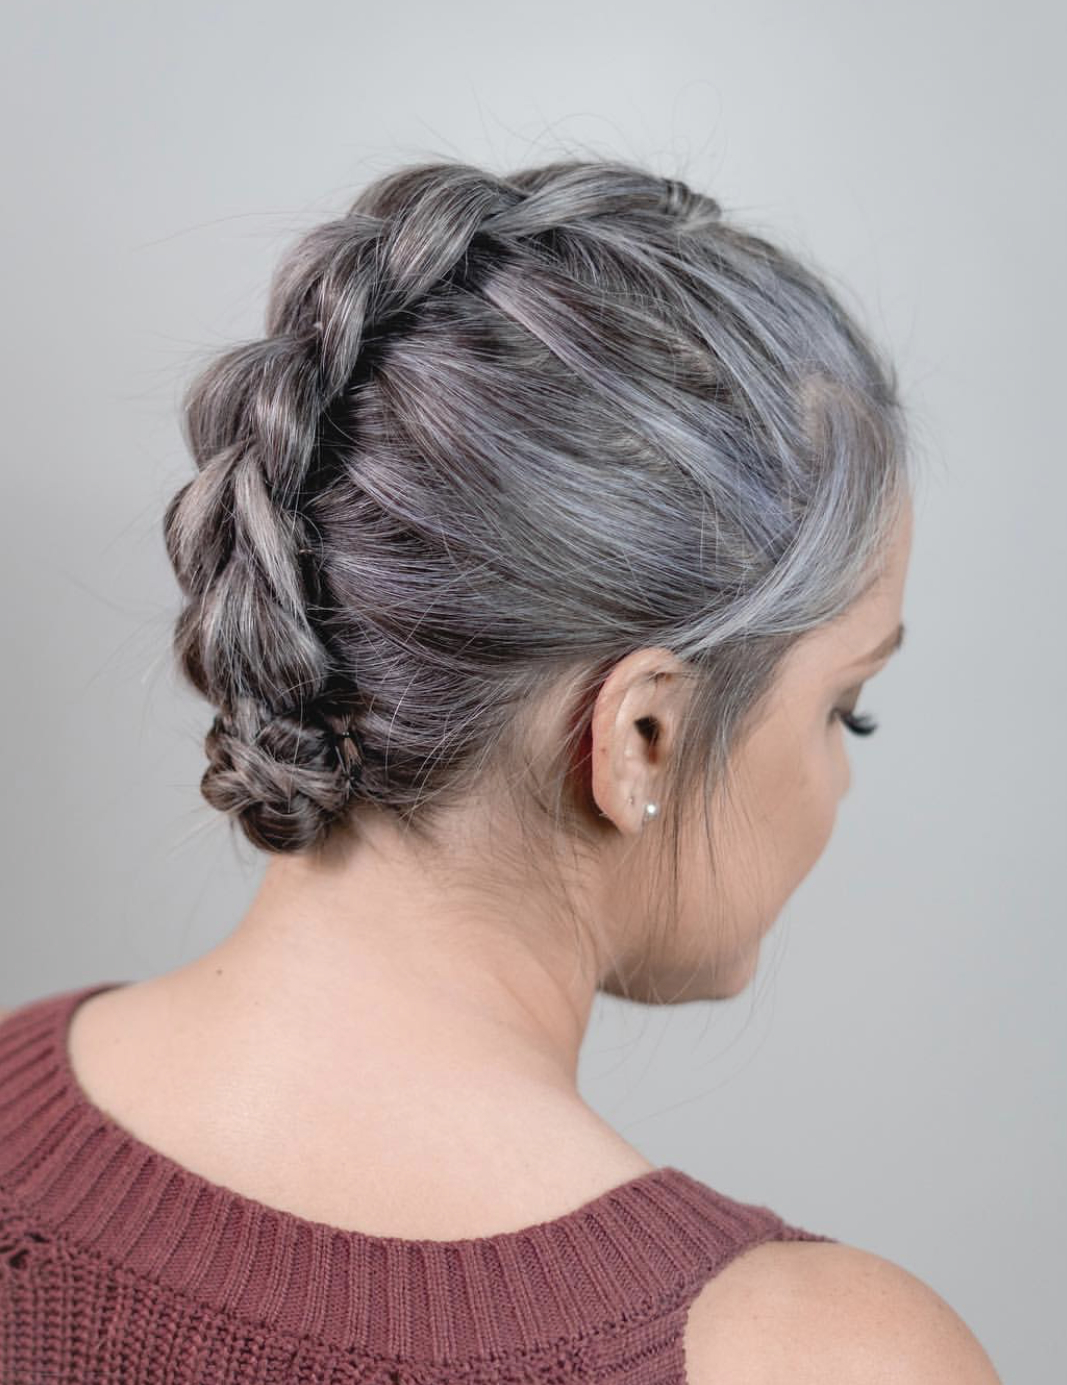 20 Best Hairstyles for Thin Gray Hair That Look Super Stylish